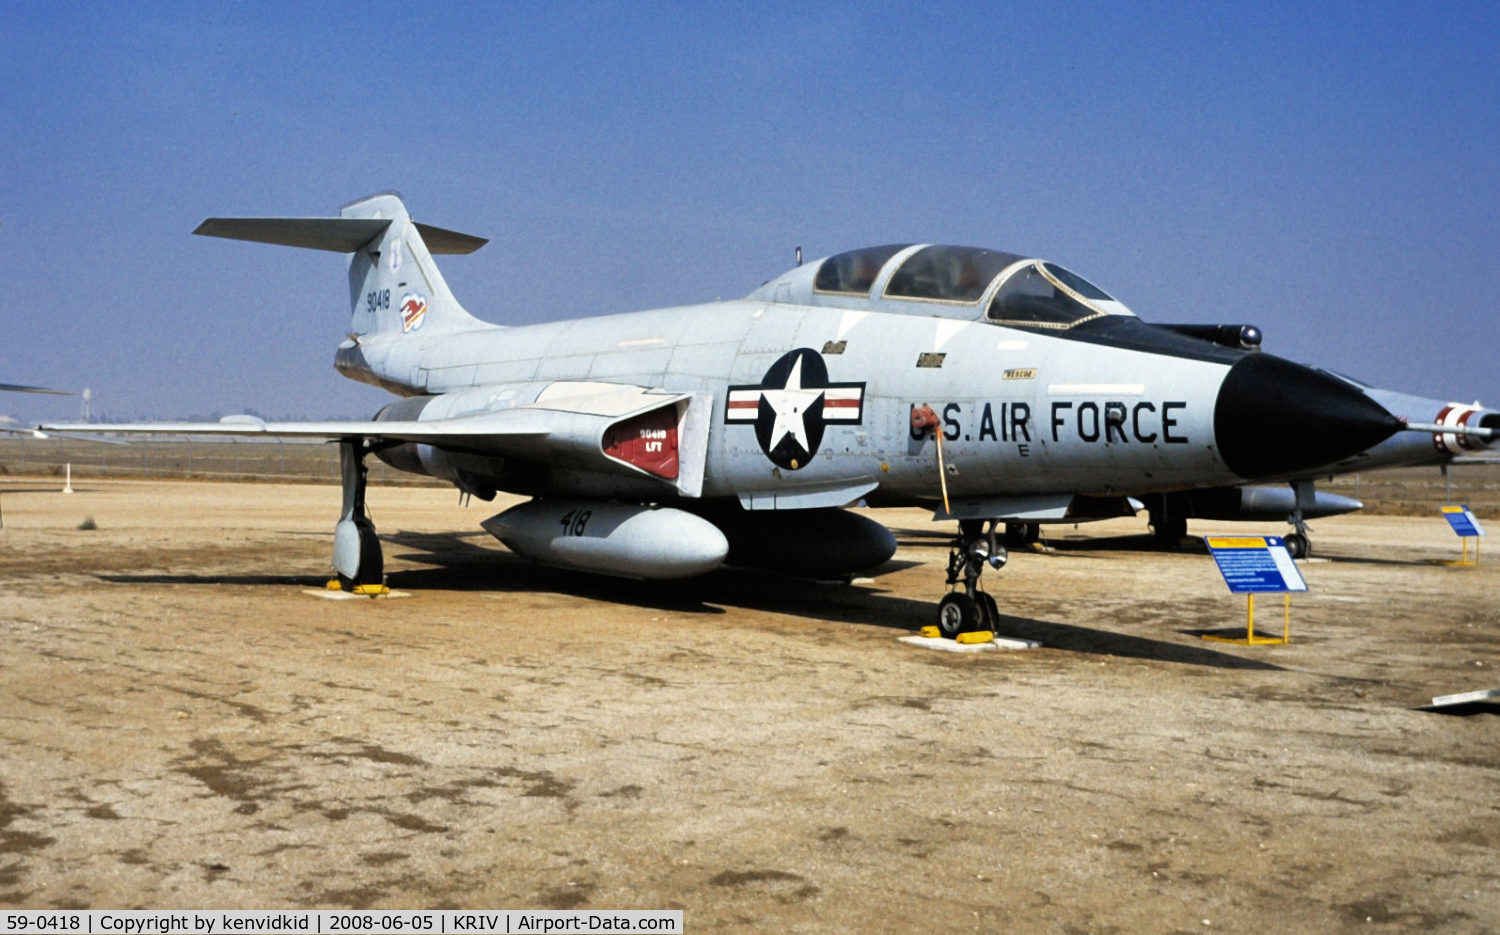 59-0418, 1959 McDonnell F-101B Voodoo C/N 742, At March AFB Museum, circa 1993.